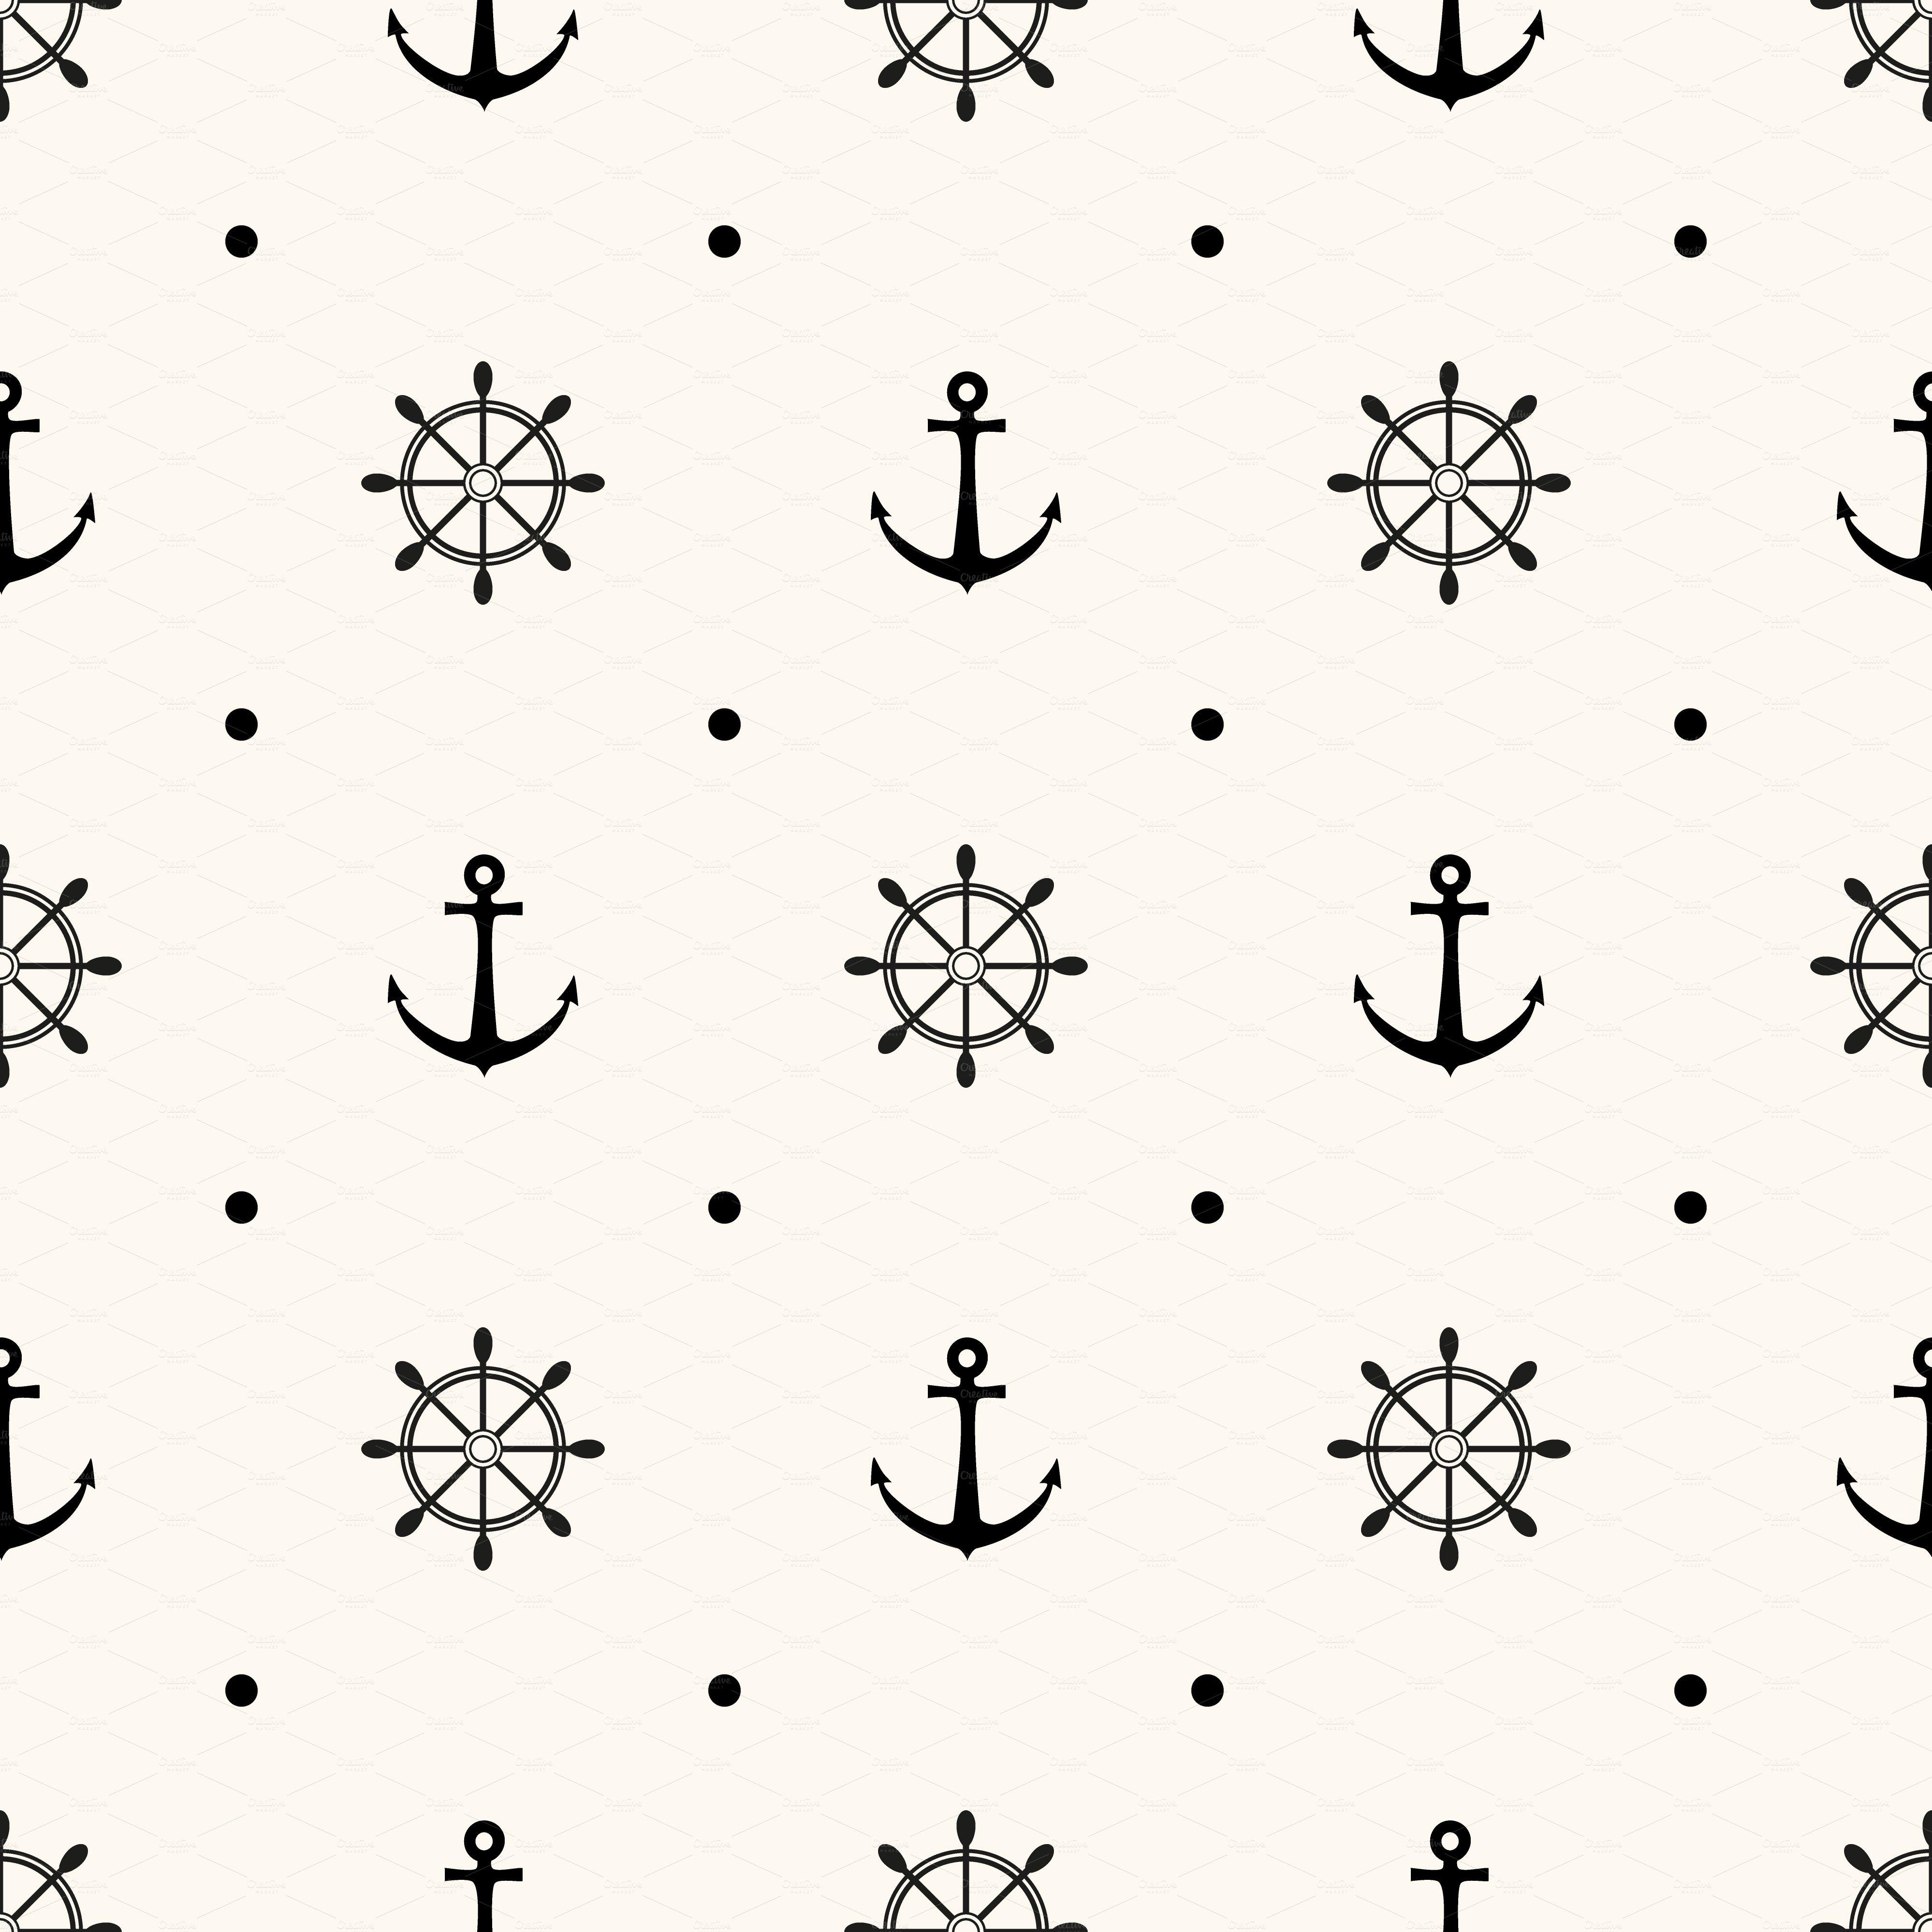 Anchor monochrome patterns. Creative, Ship wheel and Anchors